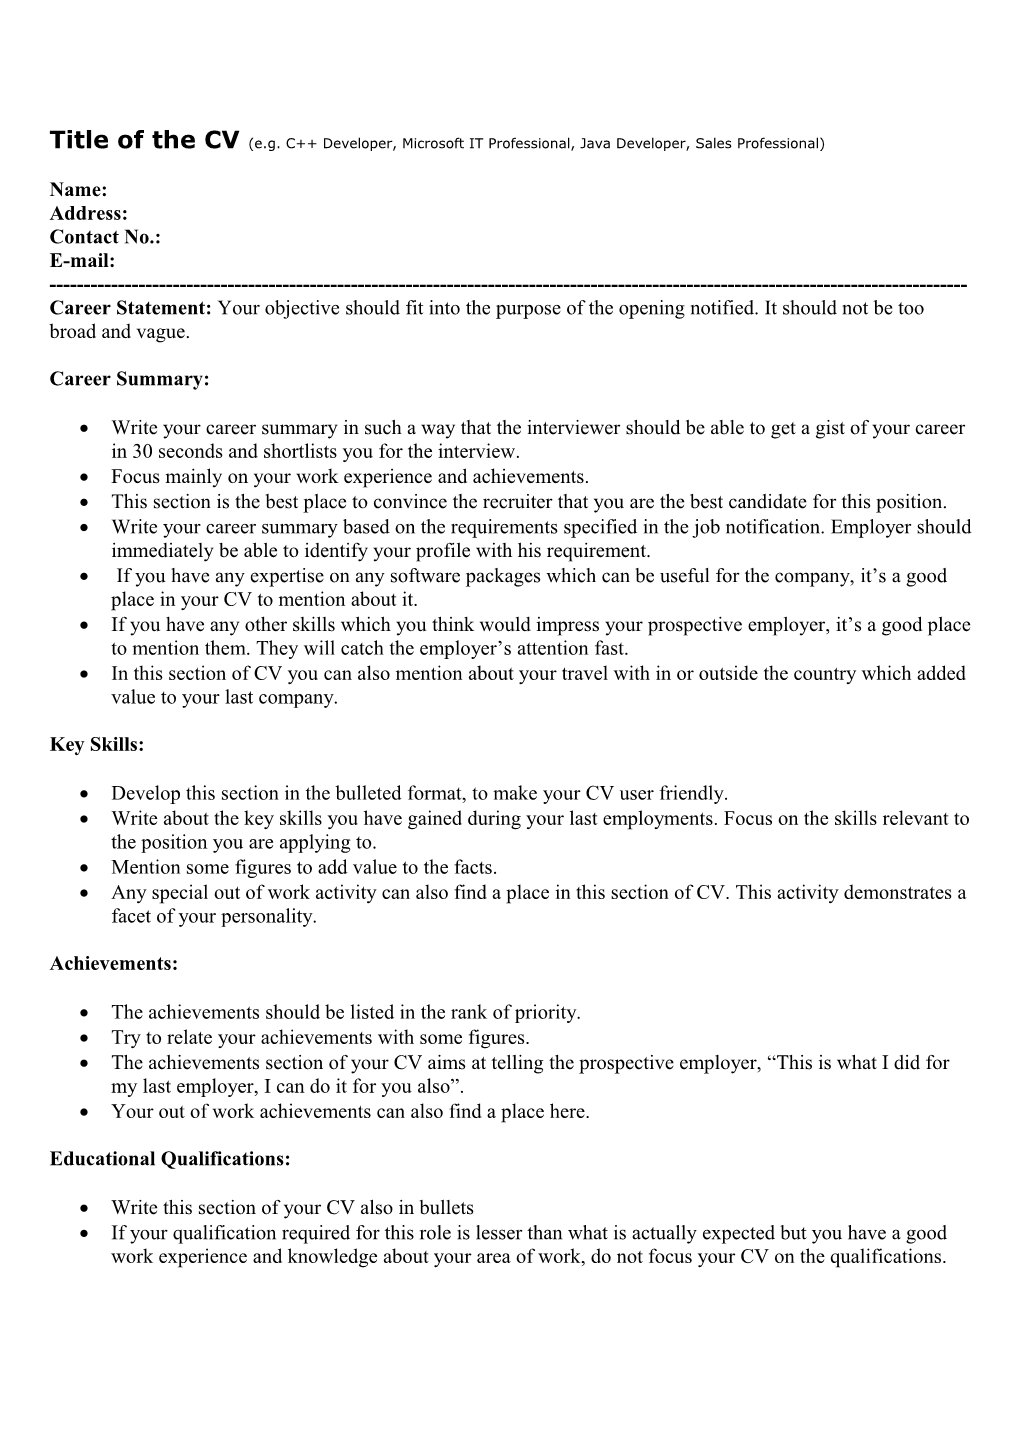 Sample CV of You Have Switched Jobs Very Frequently